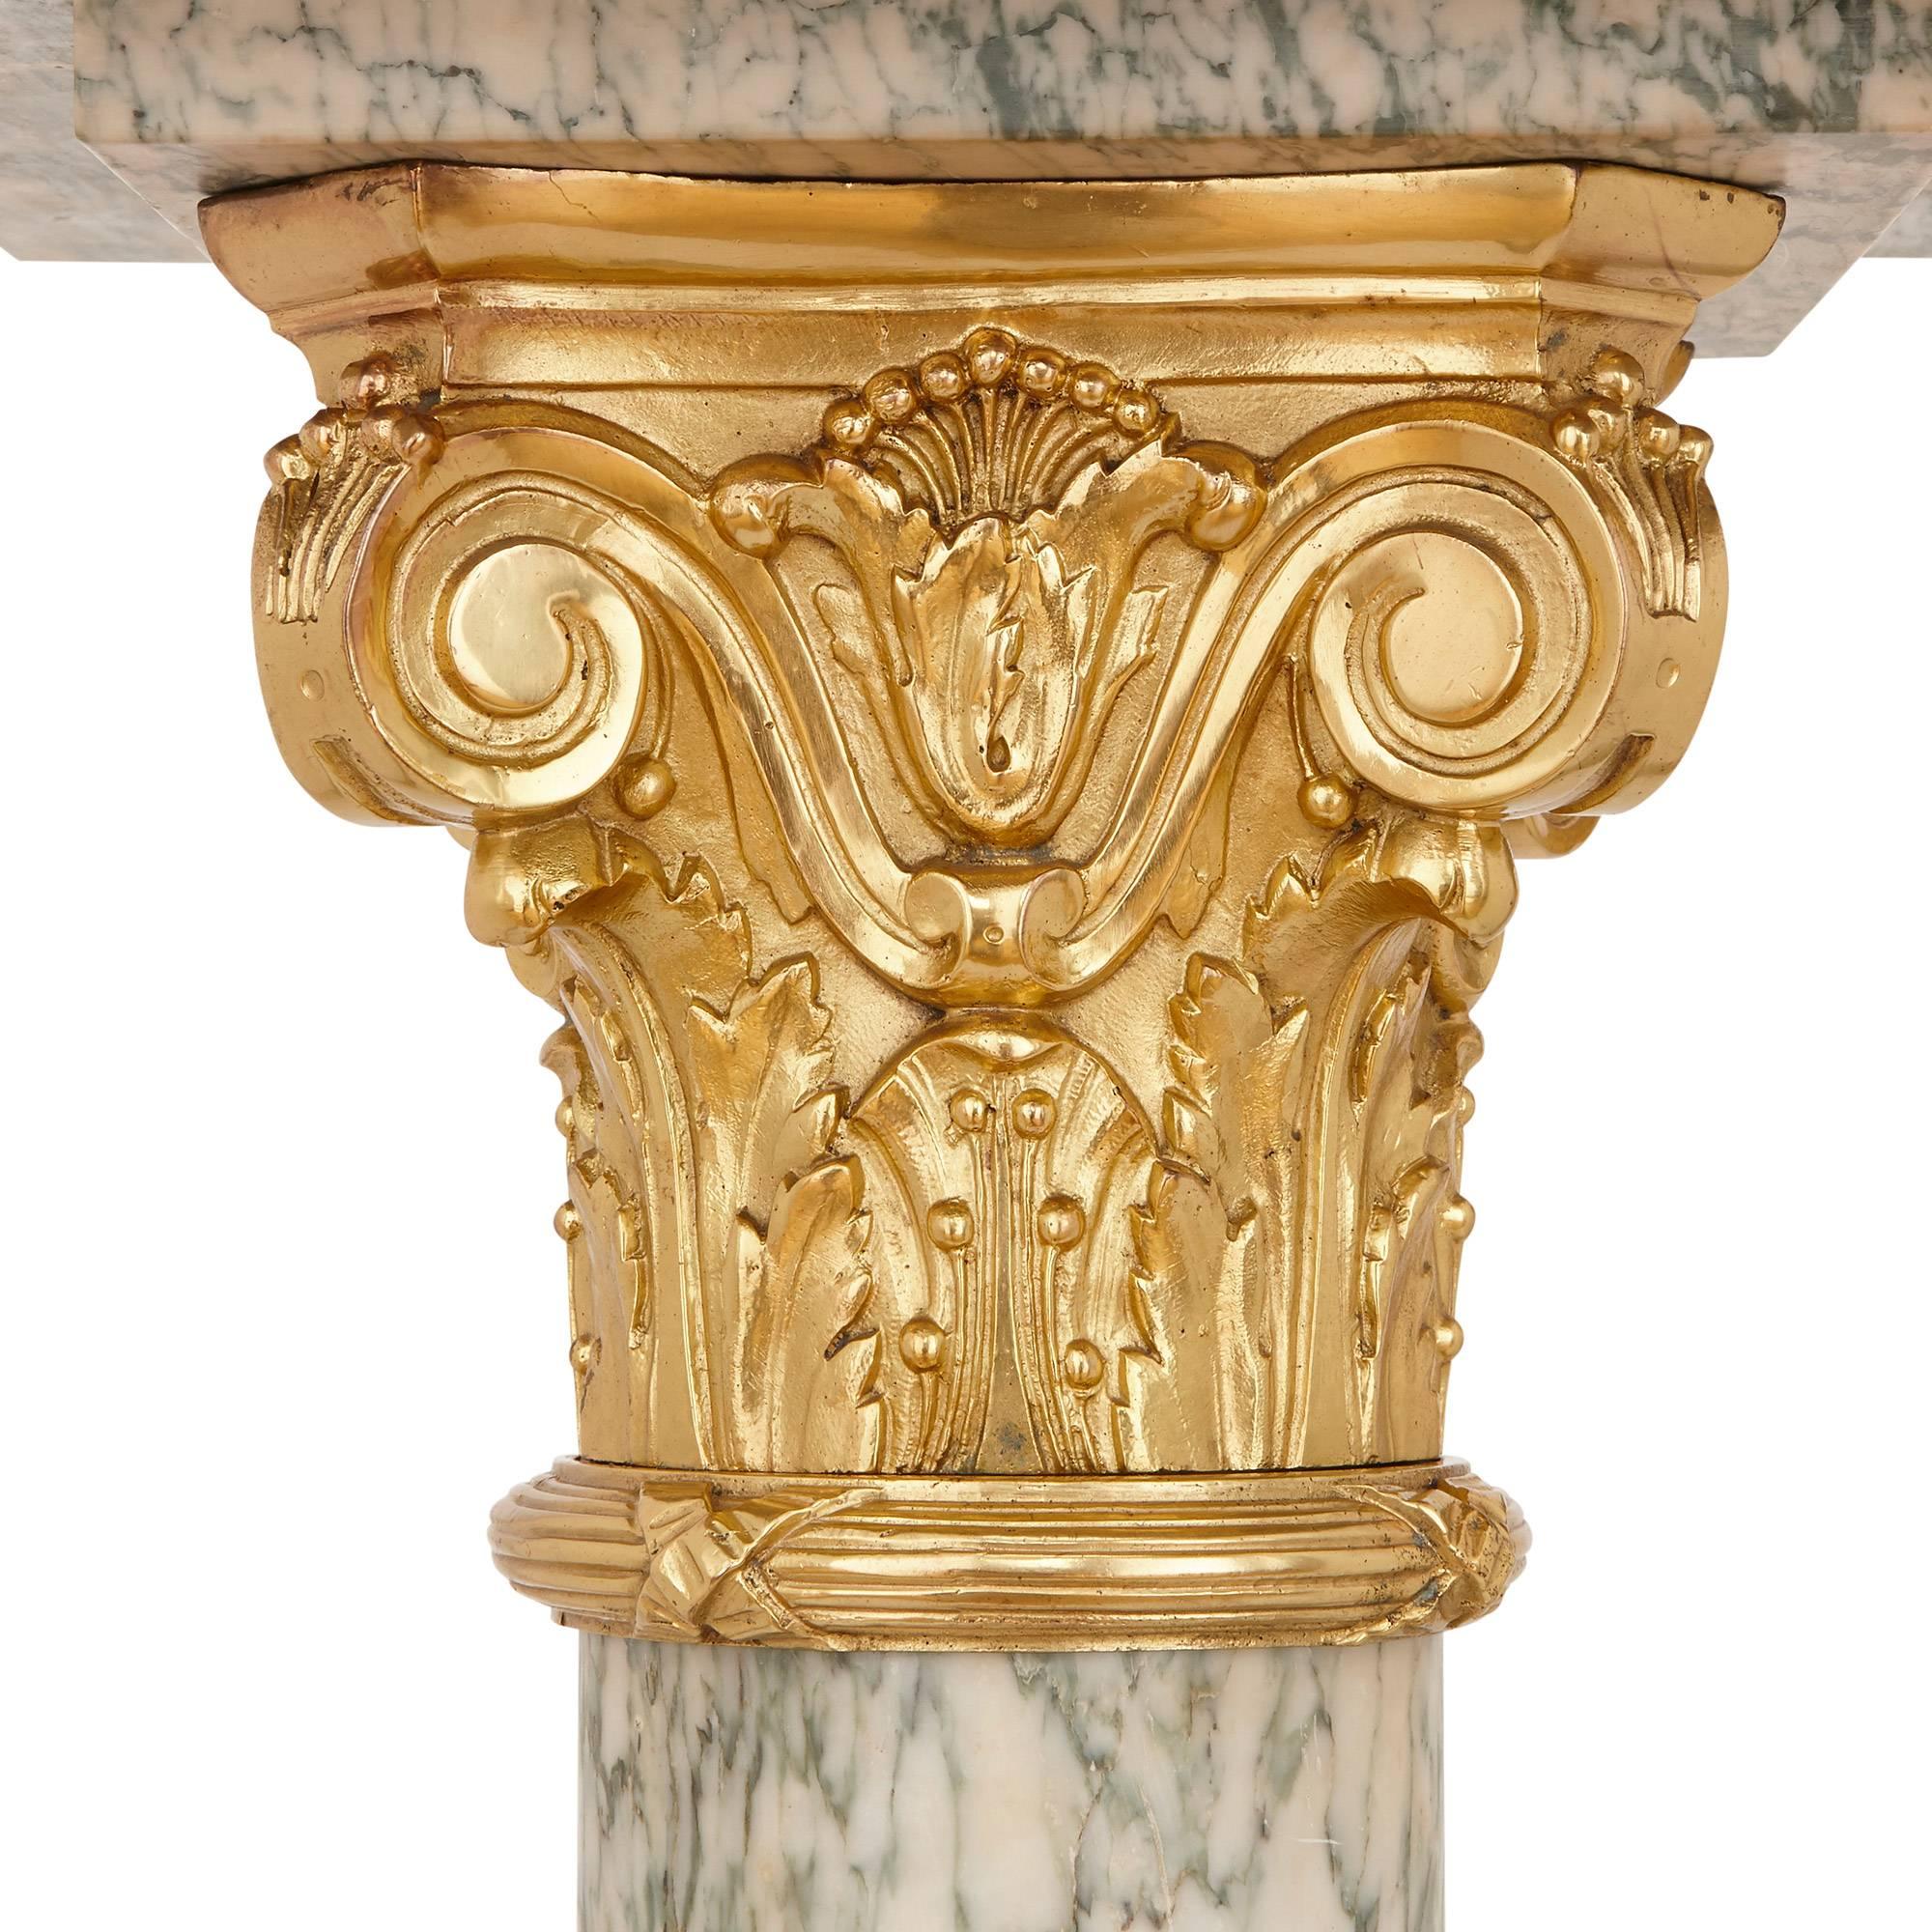 French Pair of Neoclassical Style Green and White Marble and Ormolu-Mounted Pedestals For Sale